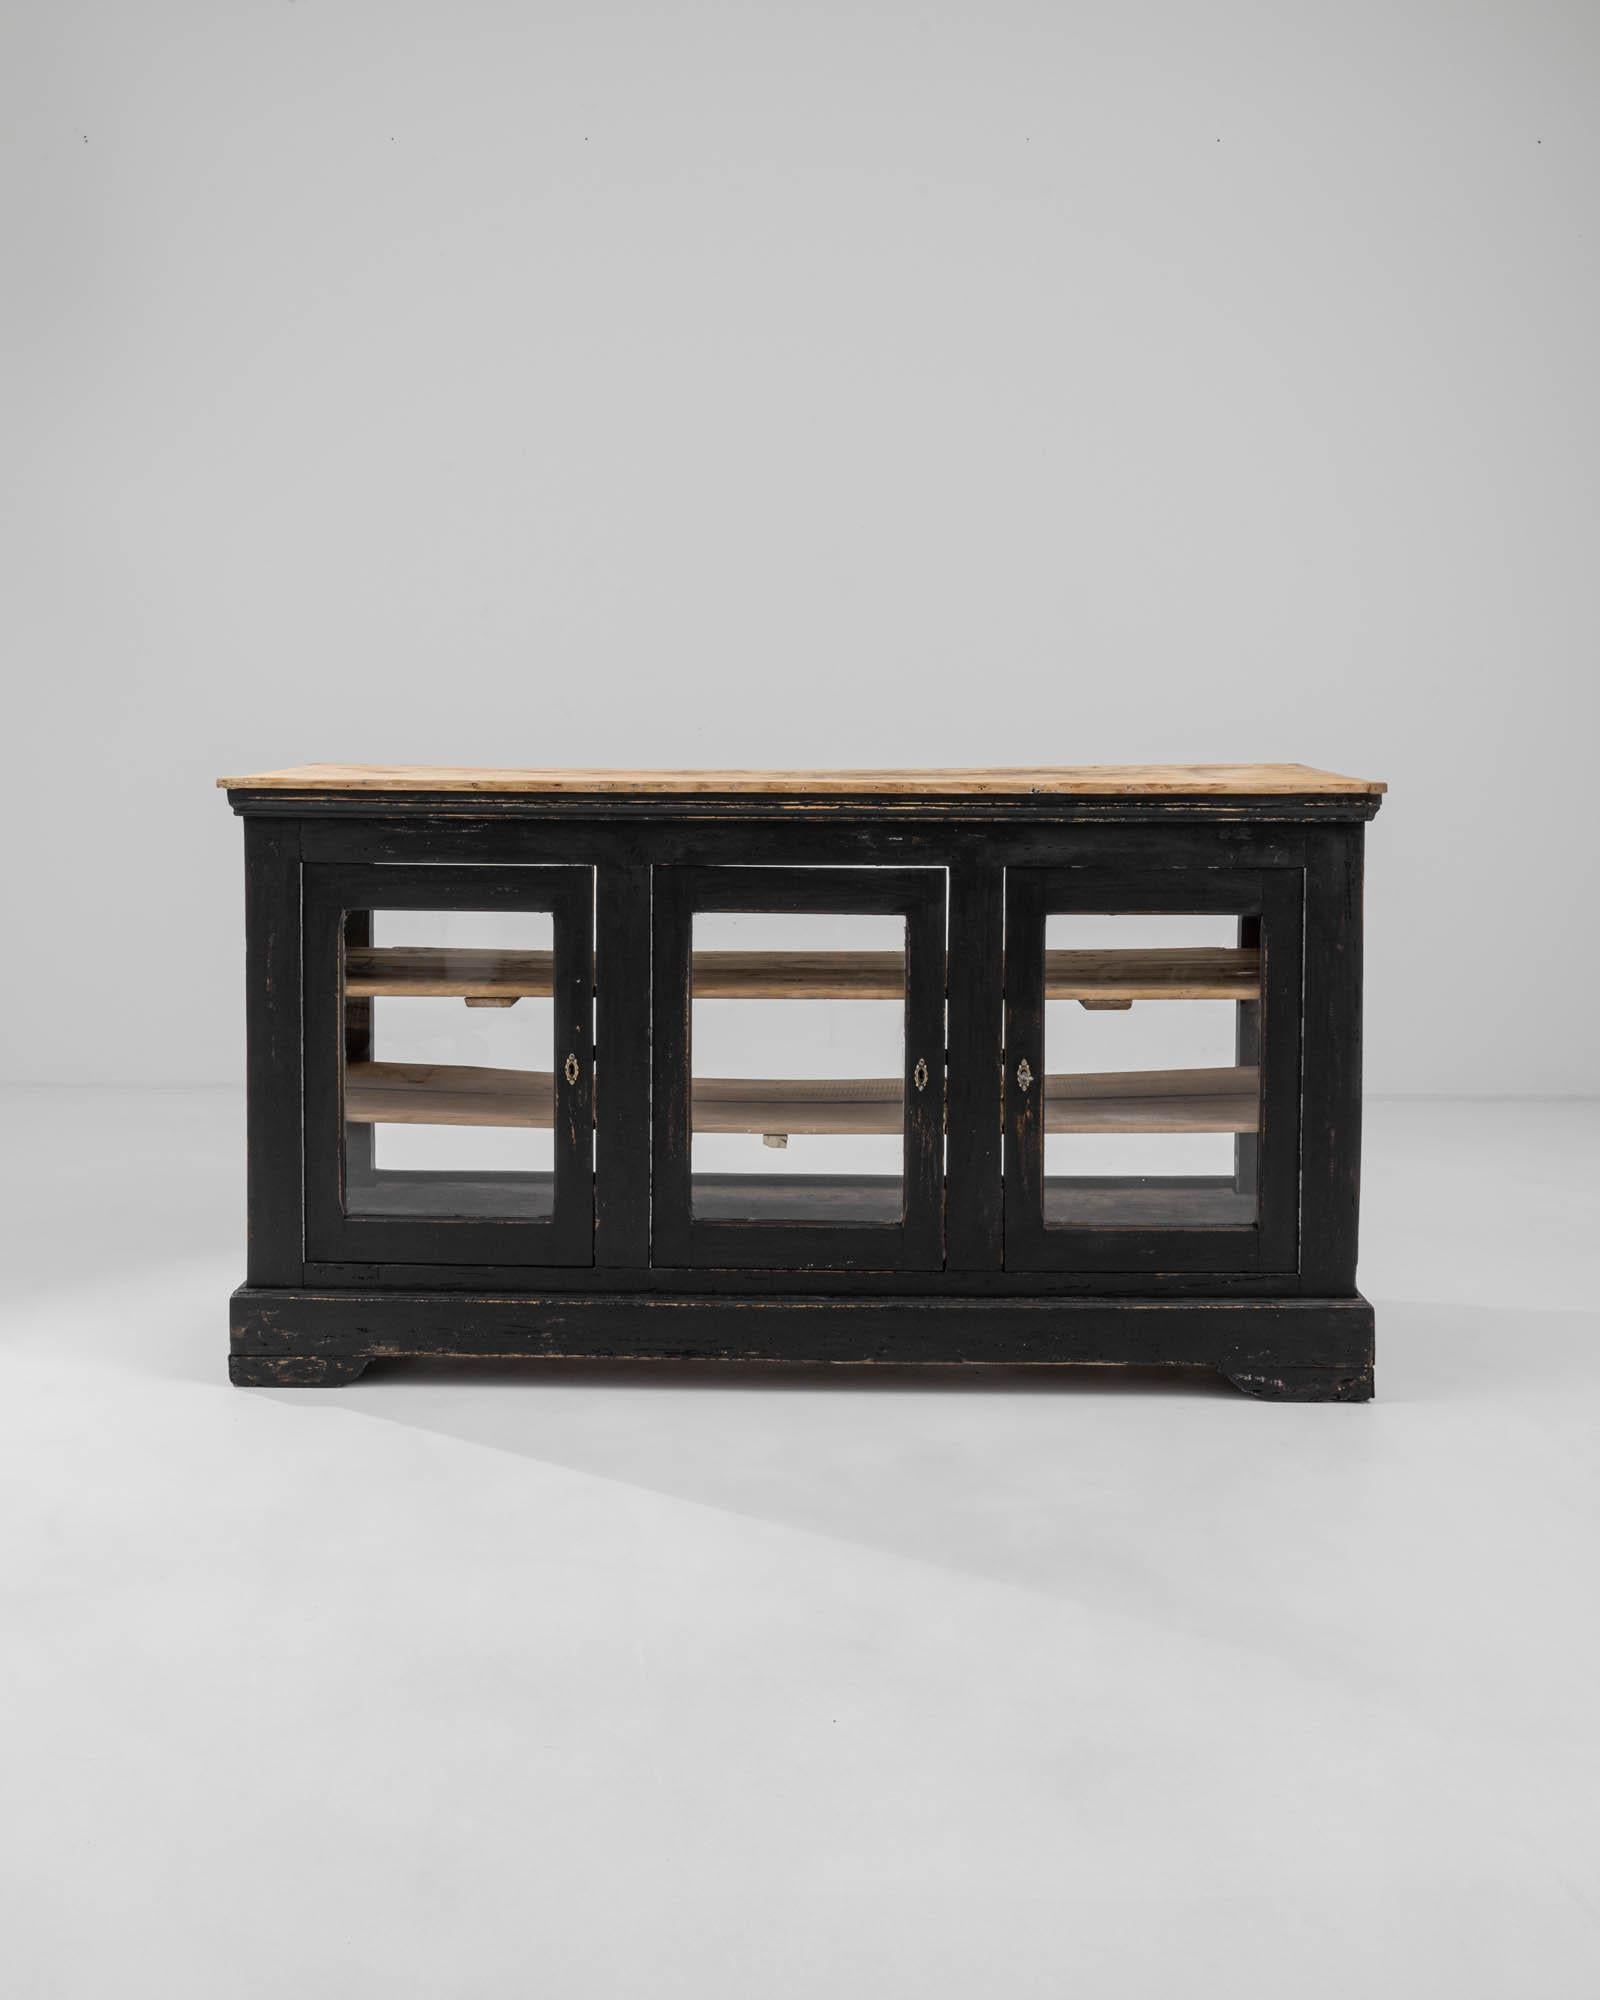 Supported by a sturdy ogee bracket base, this 19th-century French wooden bar features three glass panel doors that provide a view into its spacious interior. Additionally, the cabinet offers three small drawers at the back. Two lengthy shelves